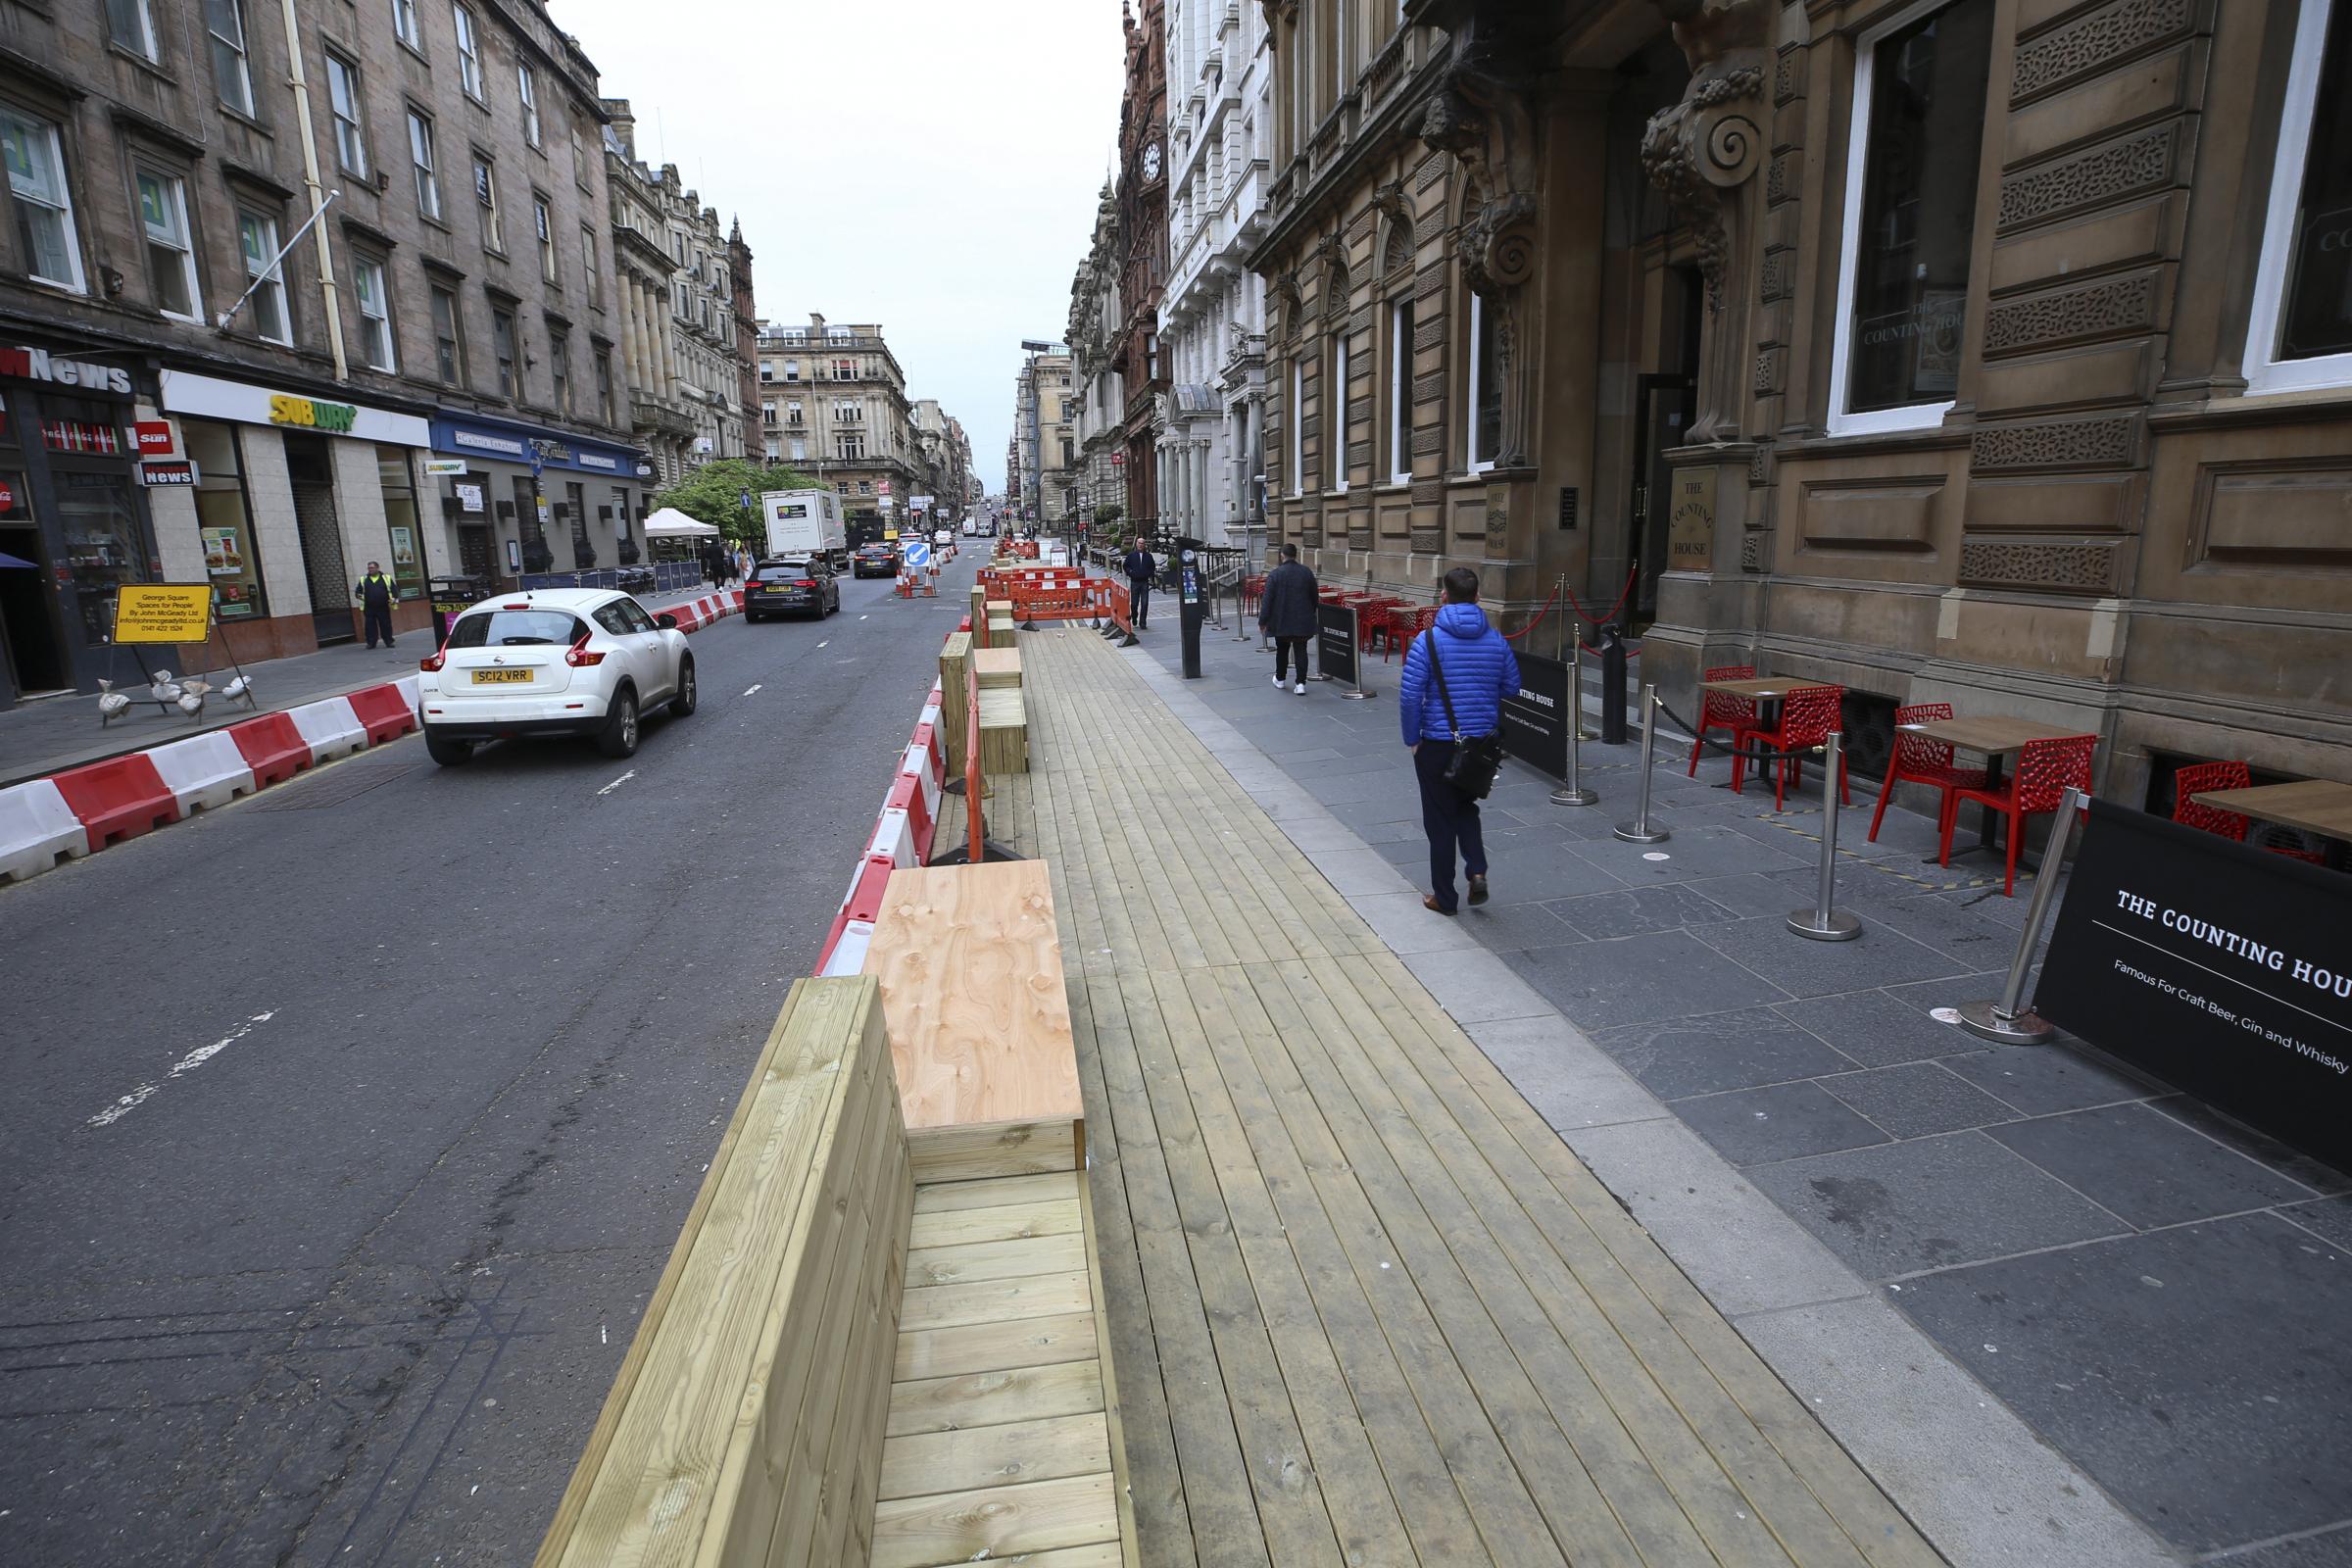 Decking and wooden seating built along St Vincent Place in Glasgow as part of Spaces for People. Photo by Gordon Terris.